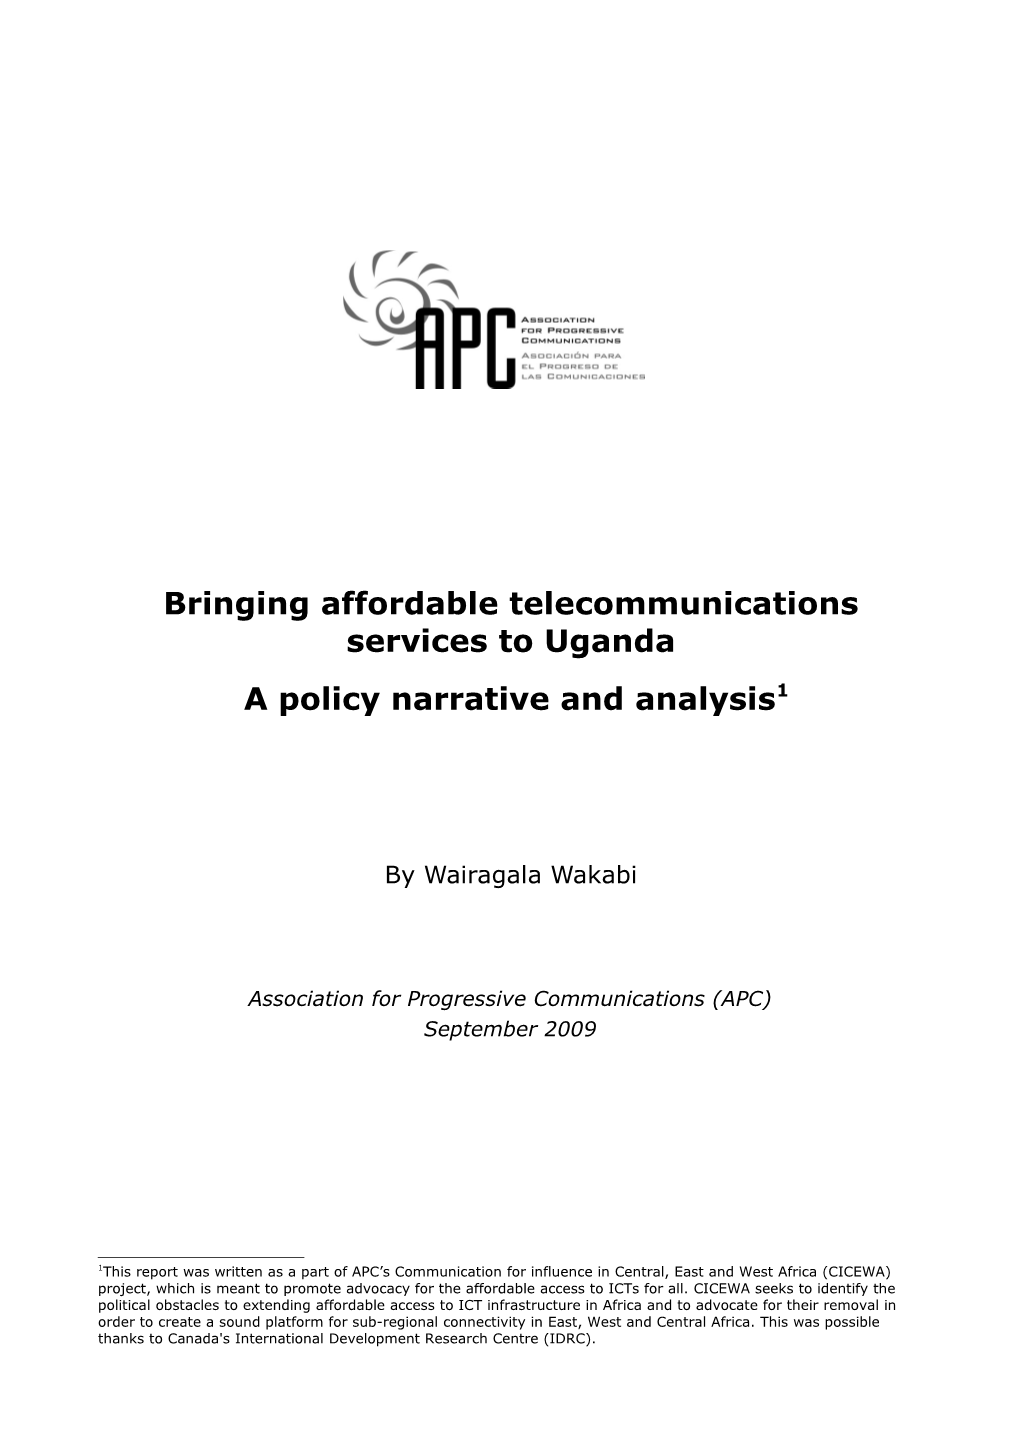 Bringing Affordable Telecommunications Services to Uganda a Policy Narrative and Analysis1